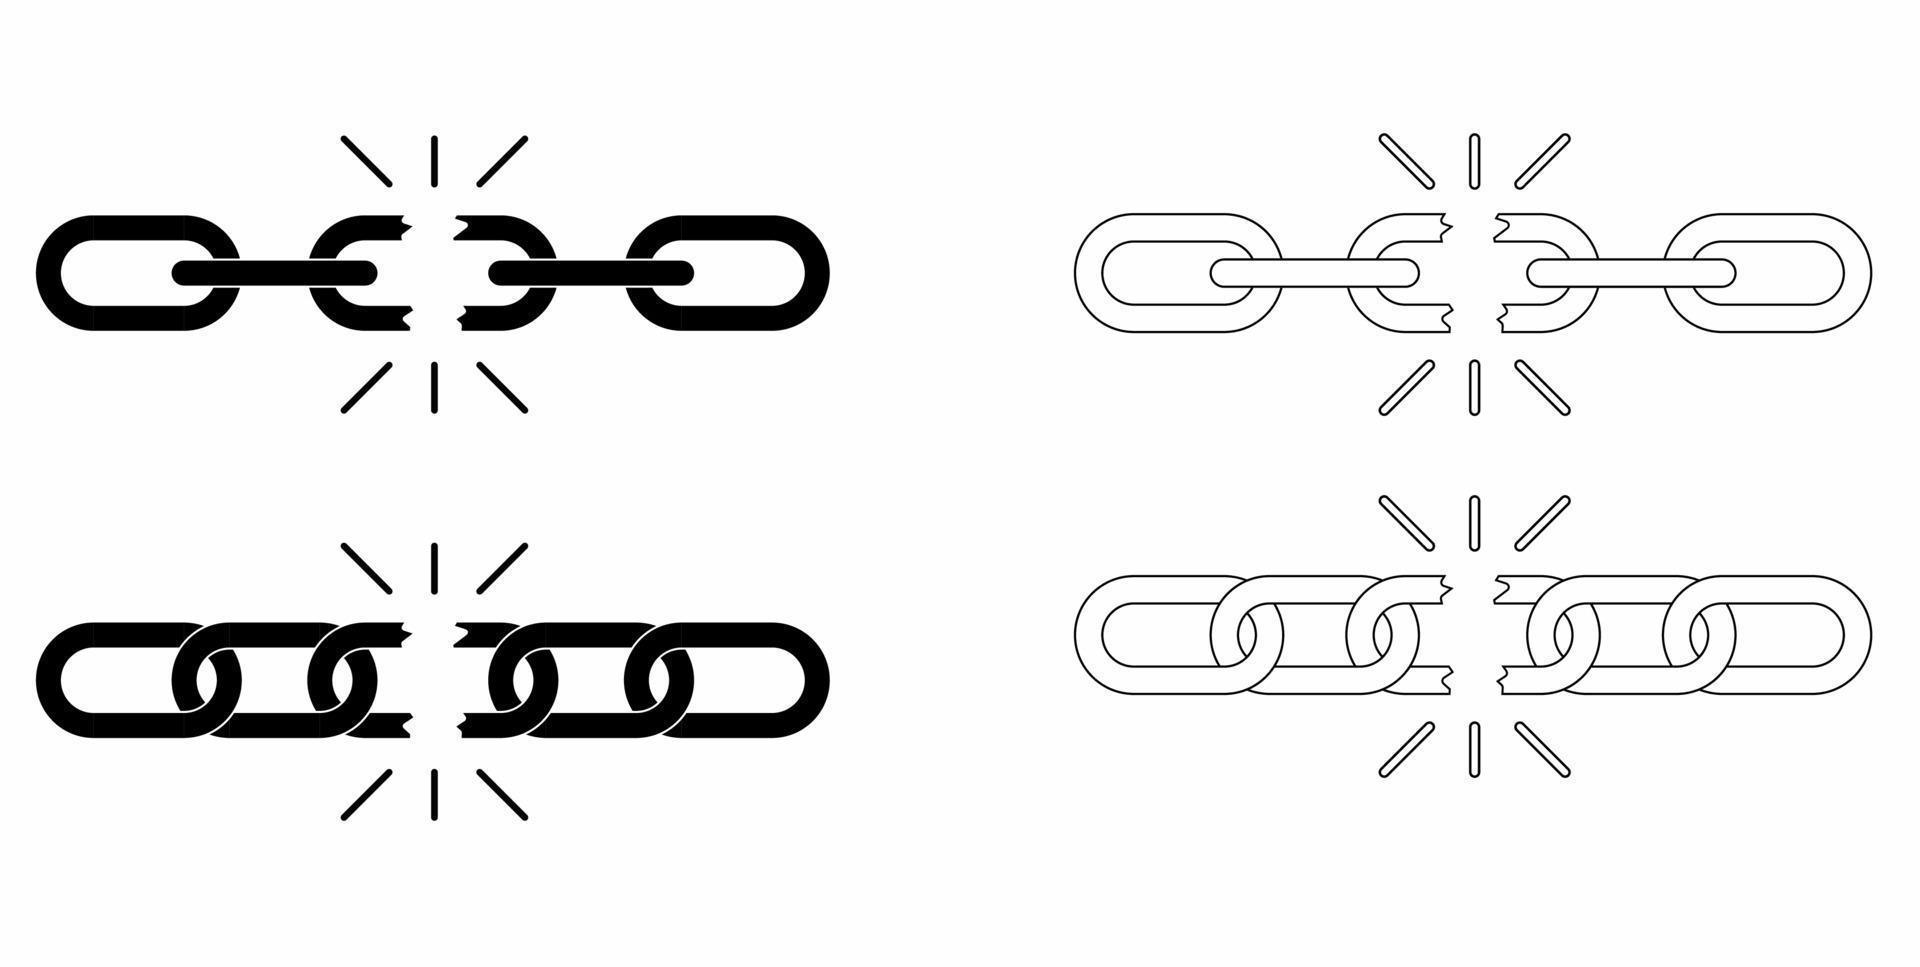 broken chain freedom icon set isolated on white background vector